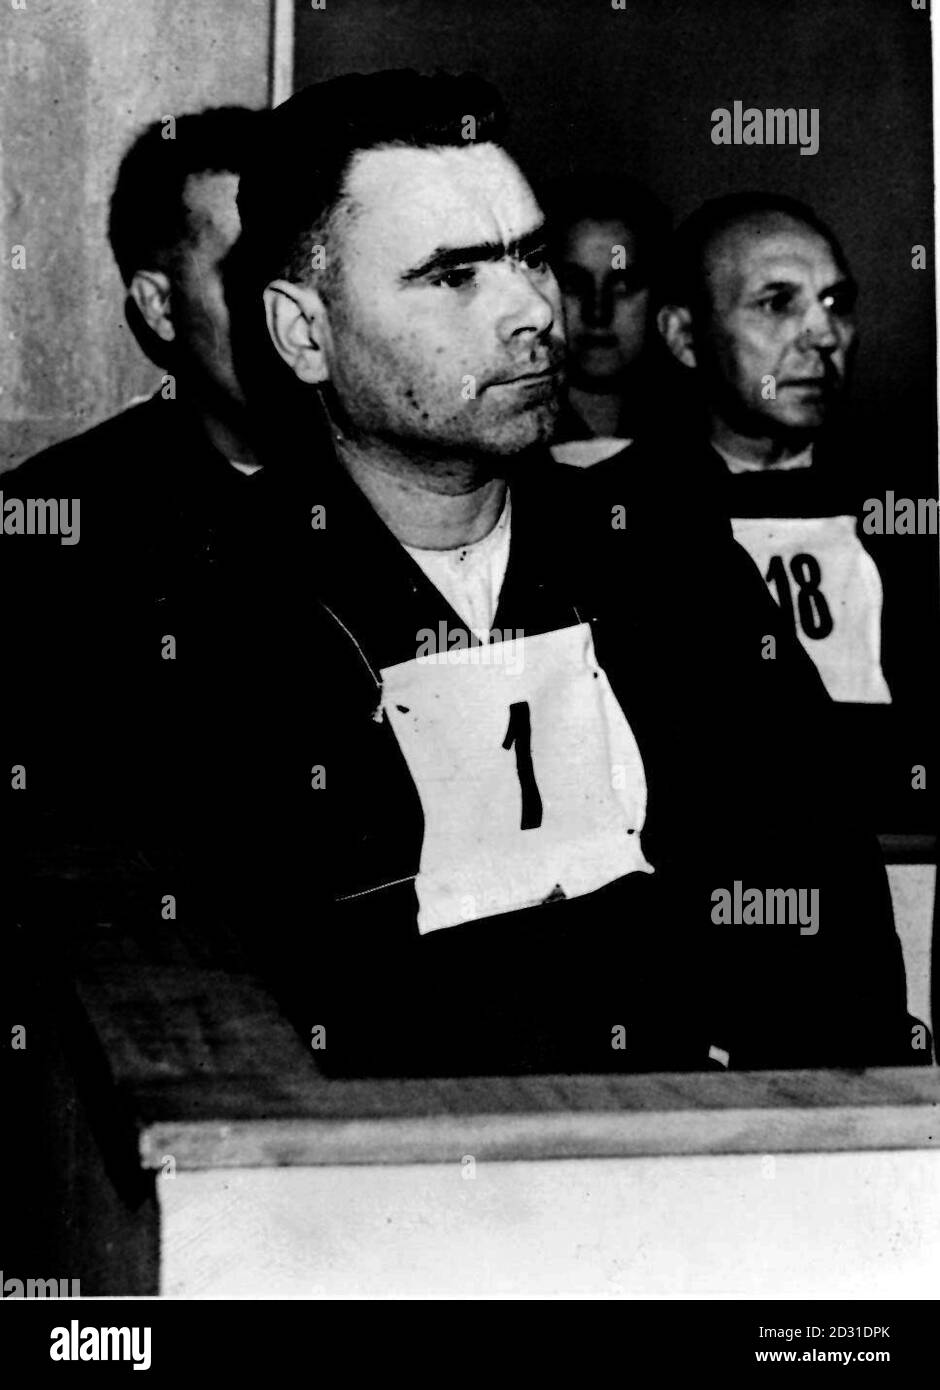 1945:  Josef Kramer, known as 'The Beast of Belsen', in the dock during his trial at Luneberg, Germany, for crimes committed during his time as Commandant of Belsen concentration camp, near Hamburg. Kramer was sentenced to death on the 17th November 1945. Picture part of PA Second World War collection.  Stock Photo